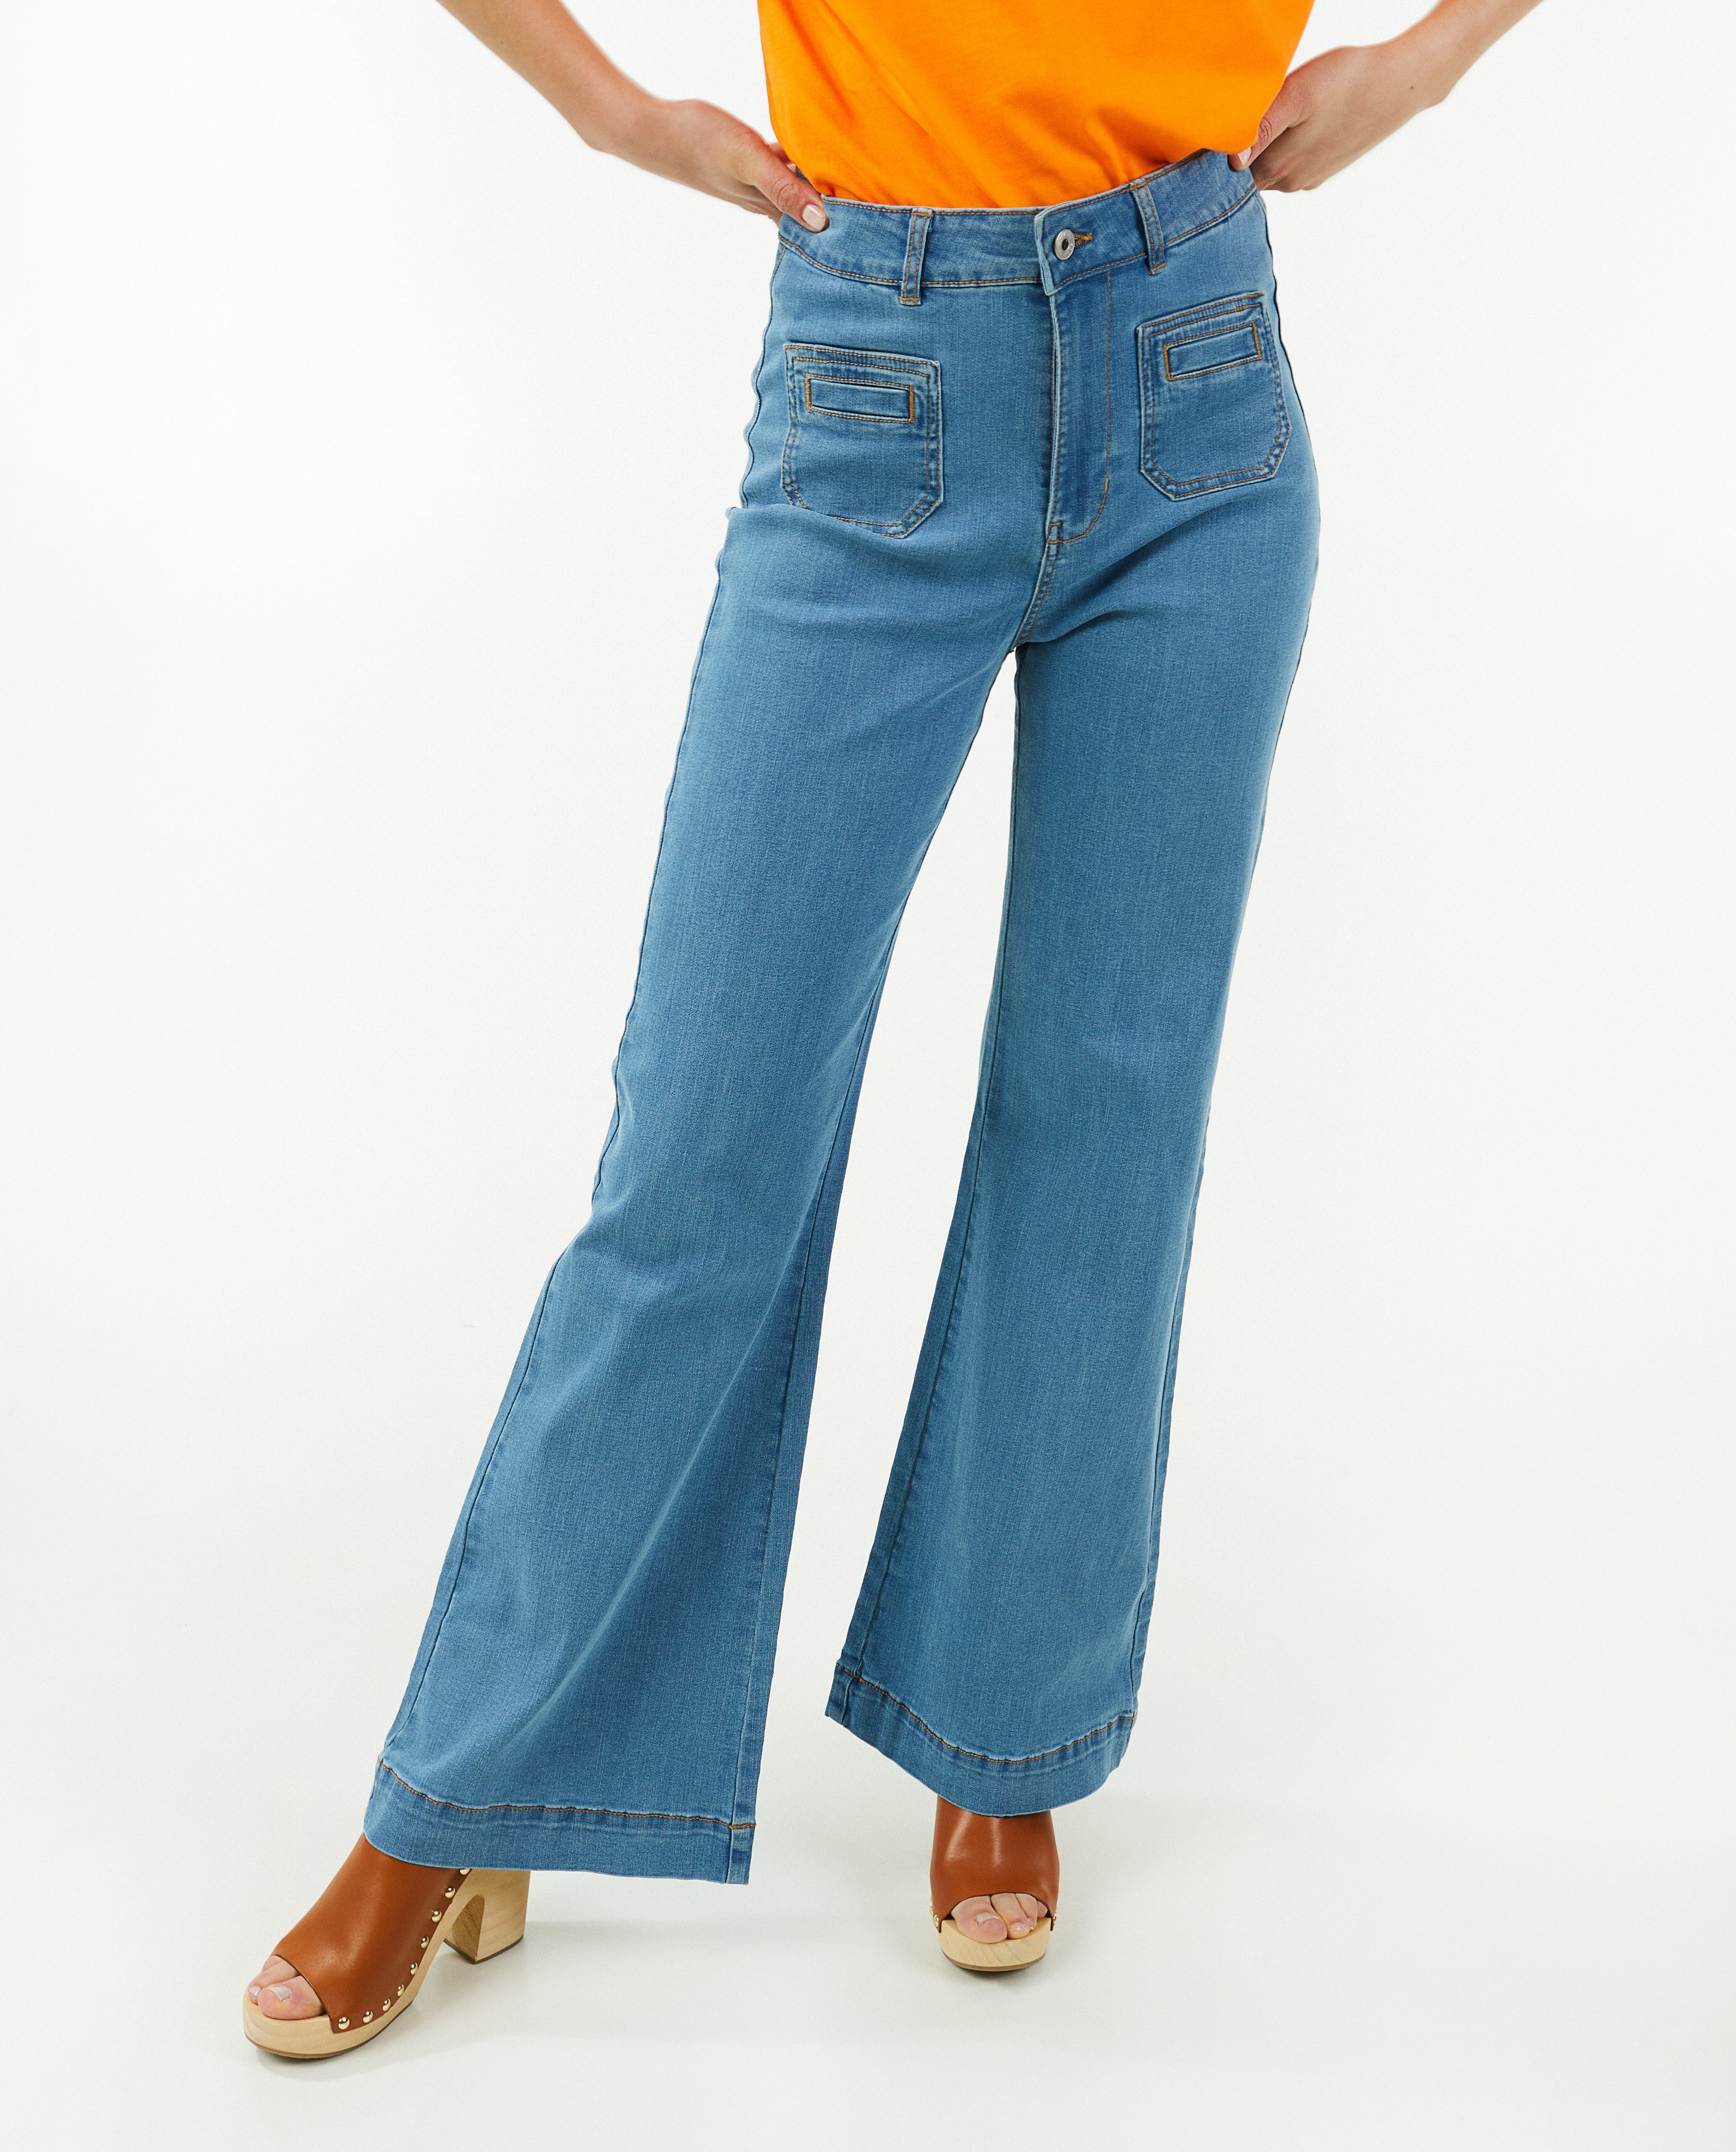 Jeans - Blauwe jeans, flared fit